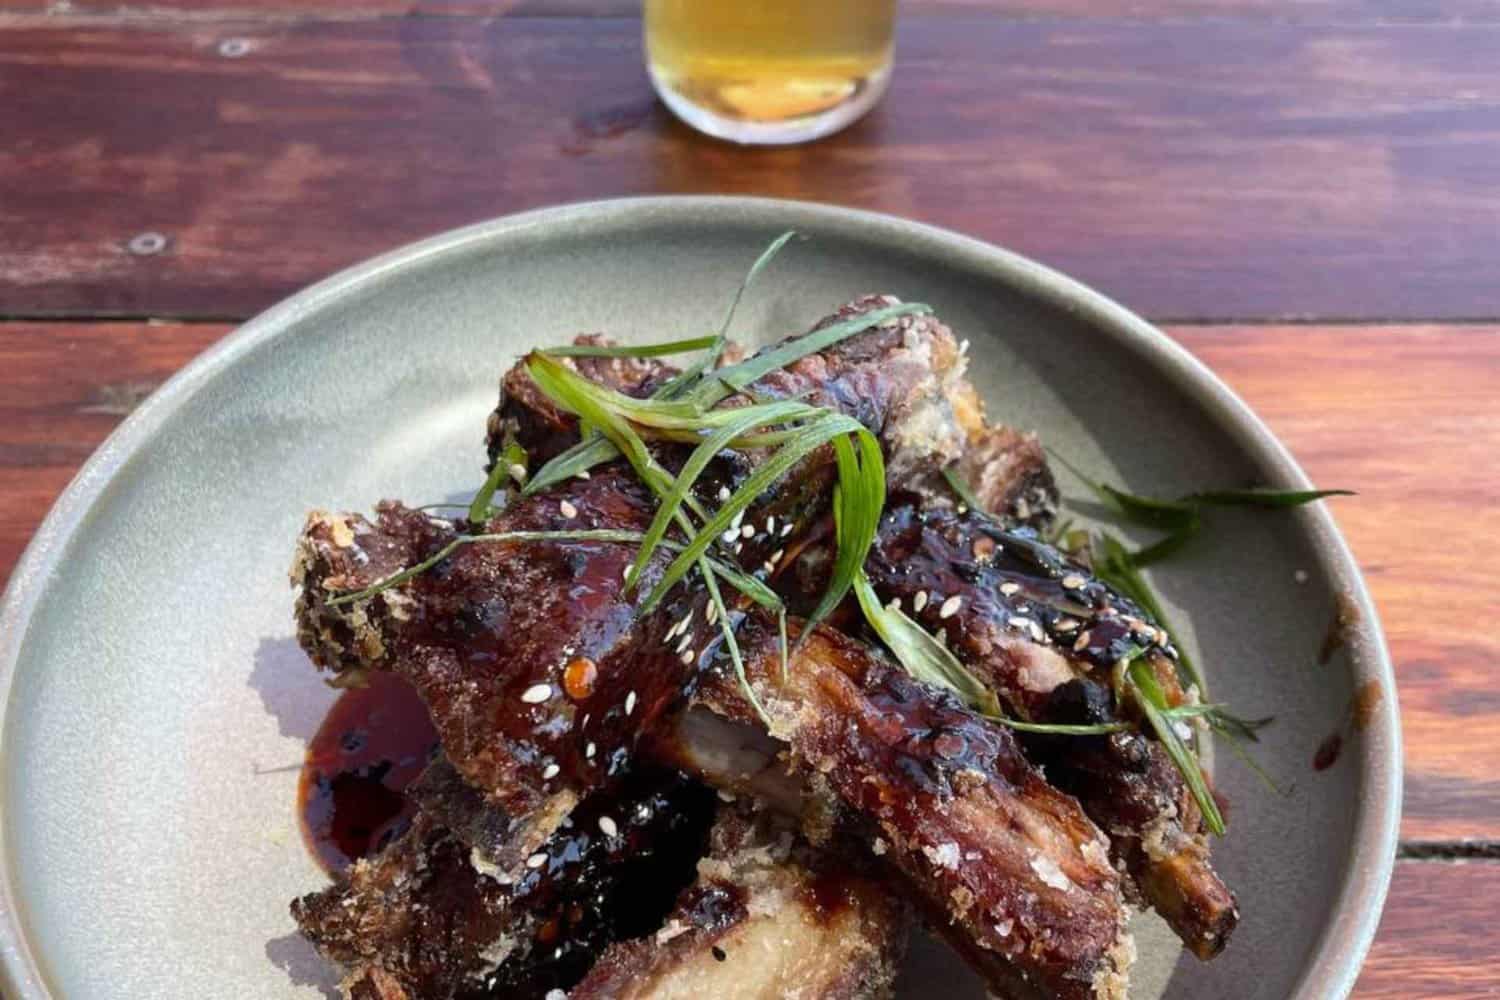 A plate of delicious sticky ribs at a Margaret River restaurant, showing the difference between ordering food from a hotel and a restaurant